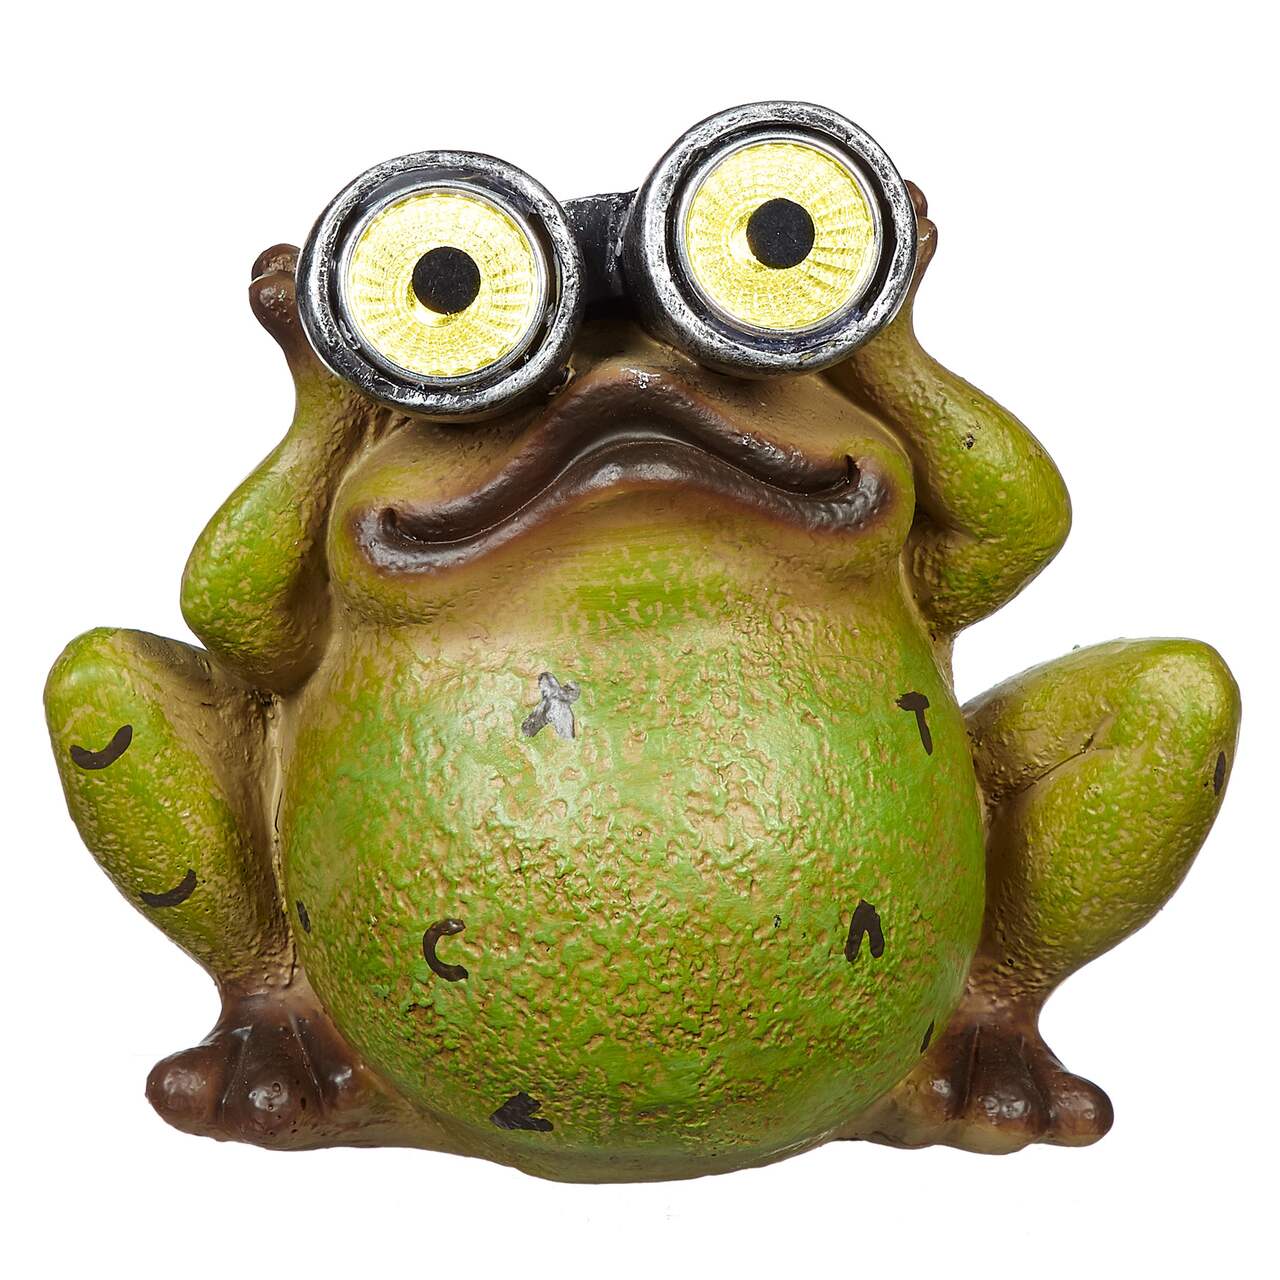 For Living Yoga Frog Lawn Ornament, 13.98-in, Bronze